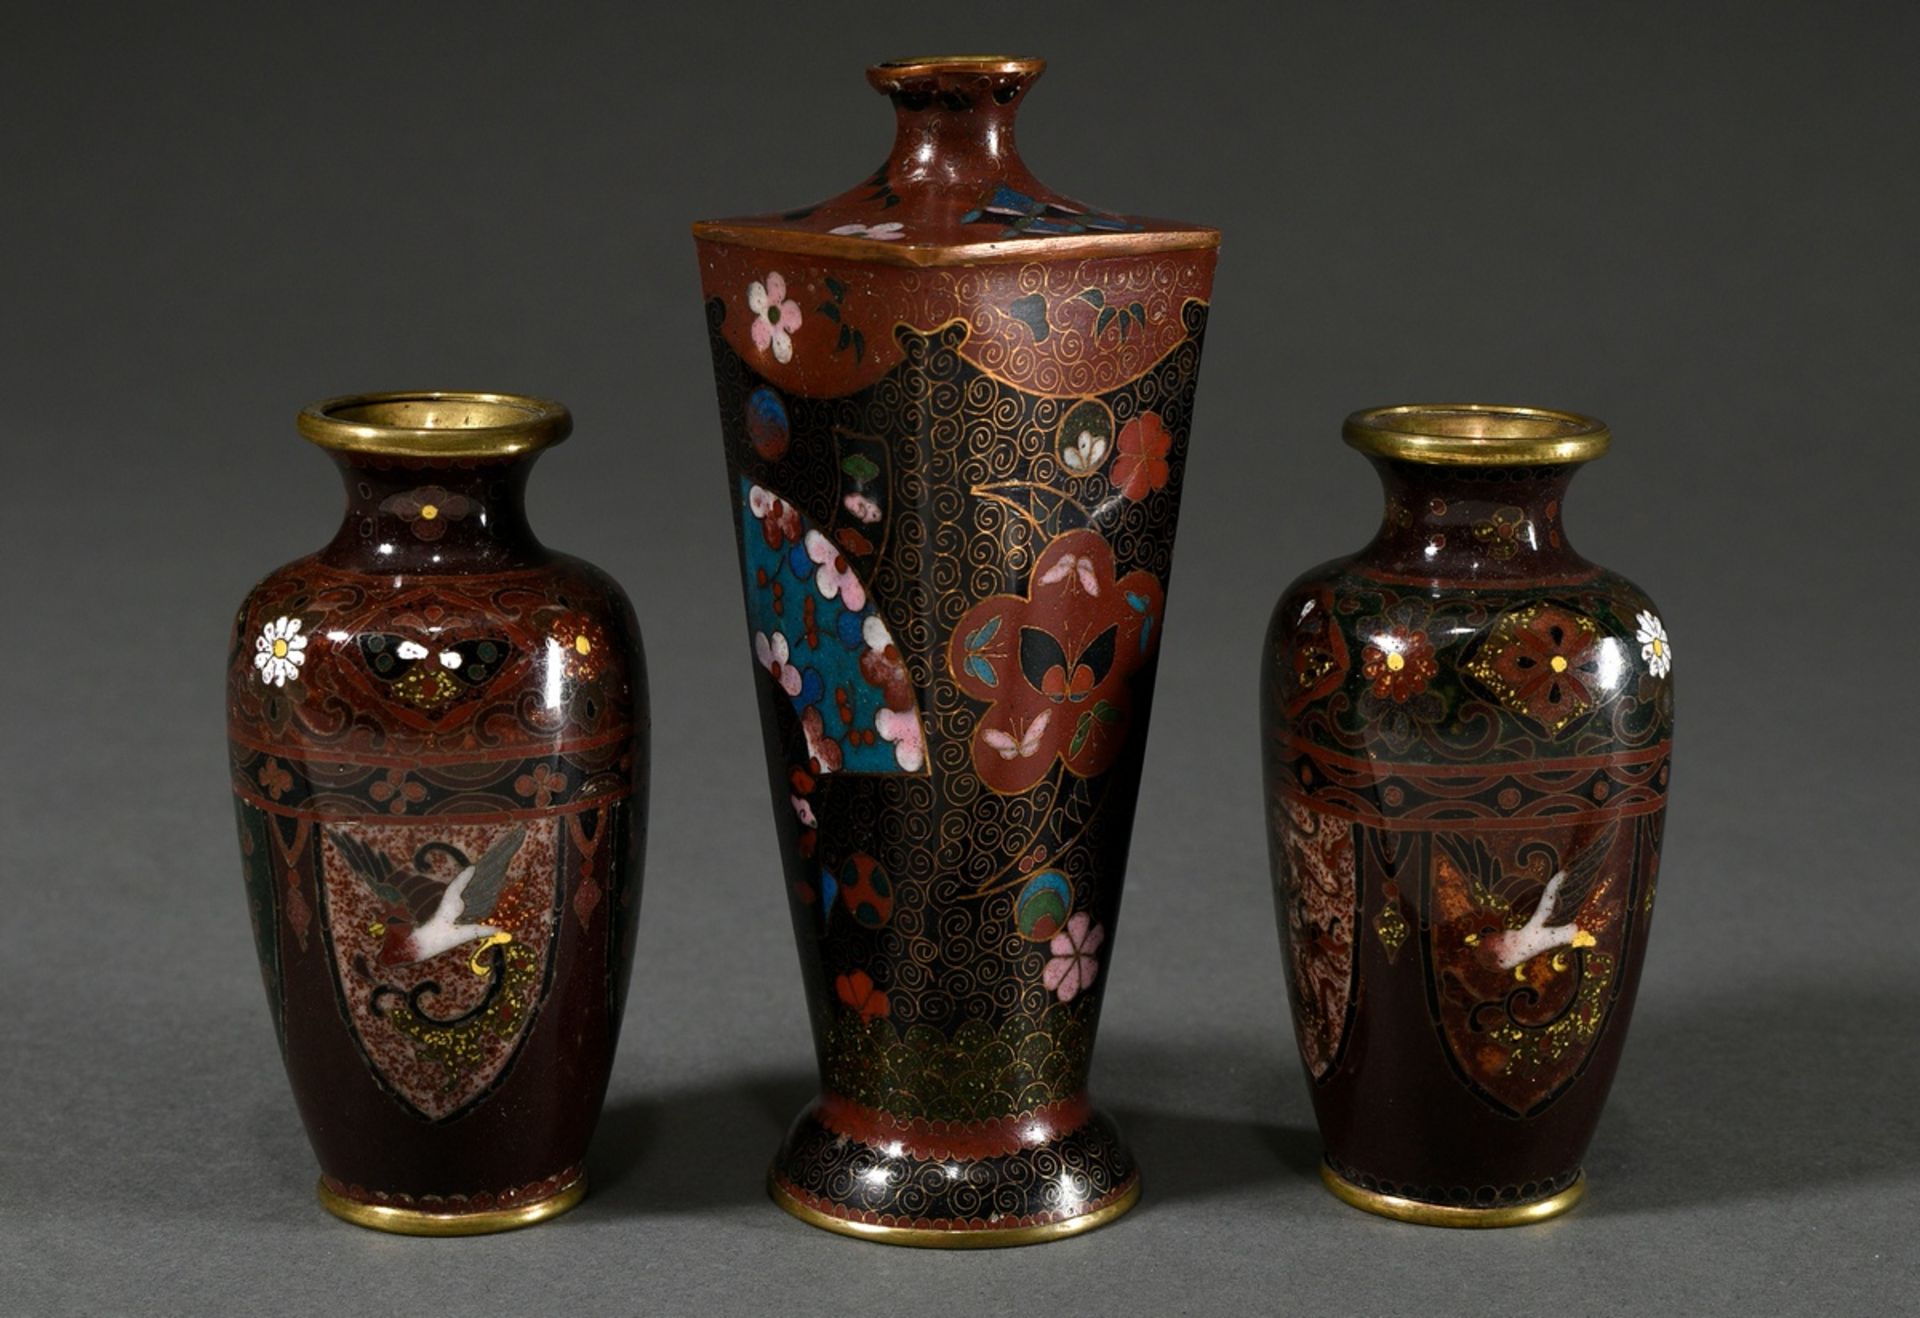 3 Various small cloisonné vases: pair with lancet-shaped cartouches "Birds and Dragons" and tall va